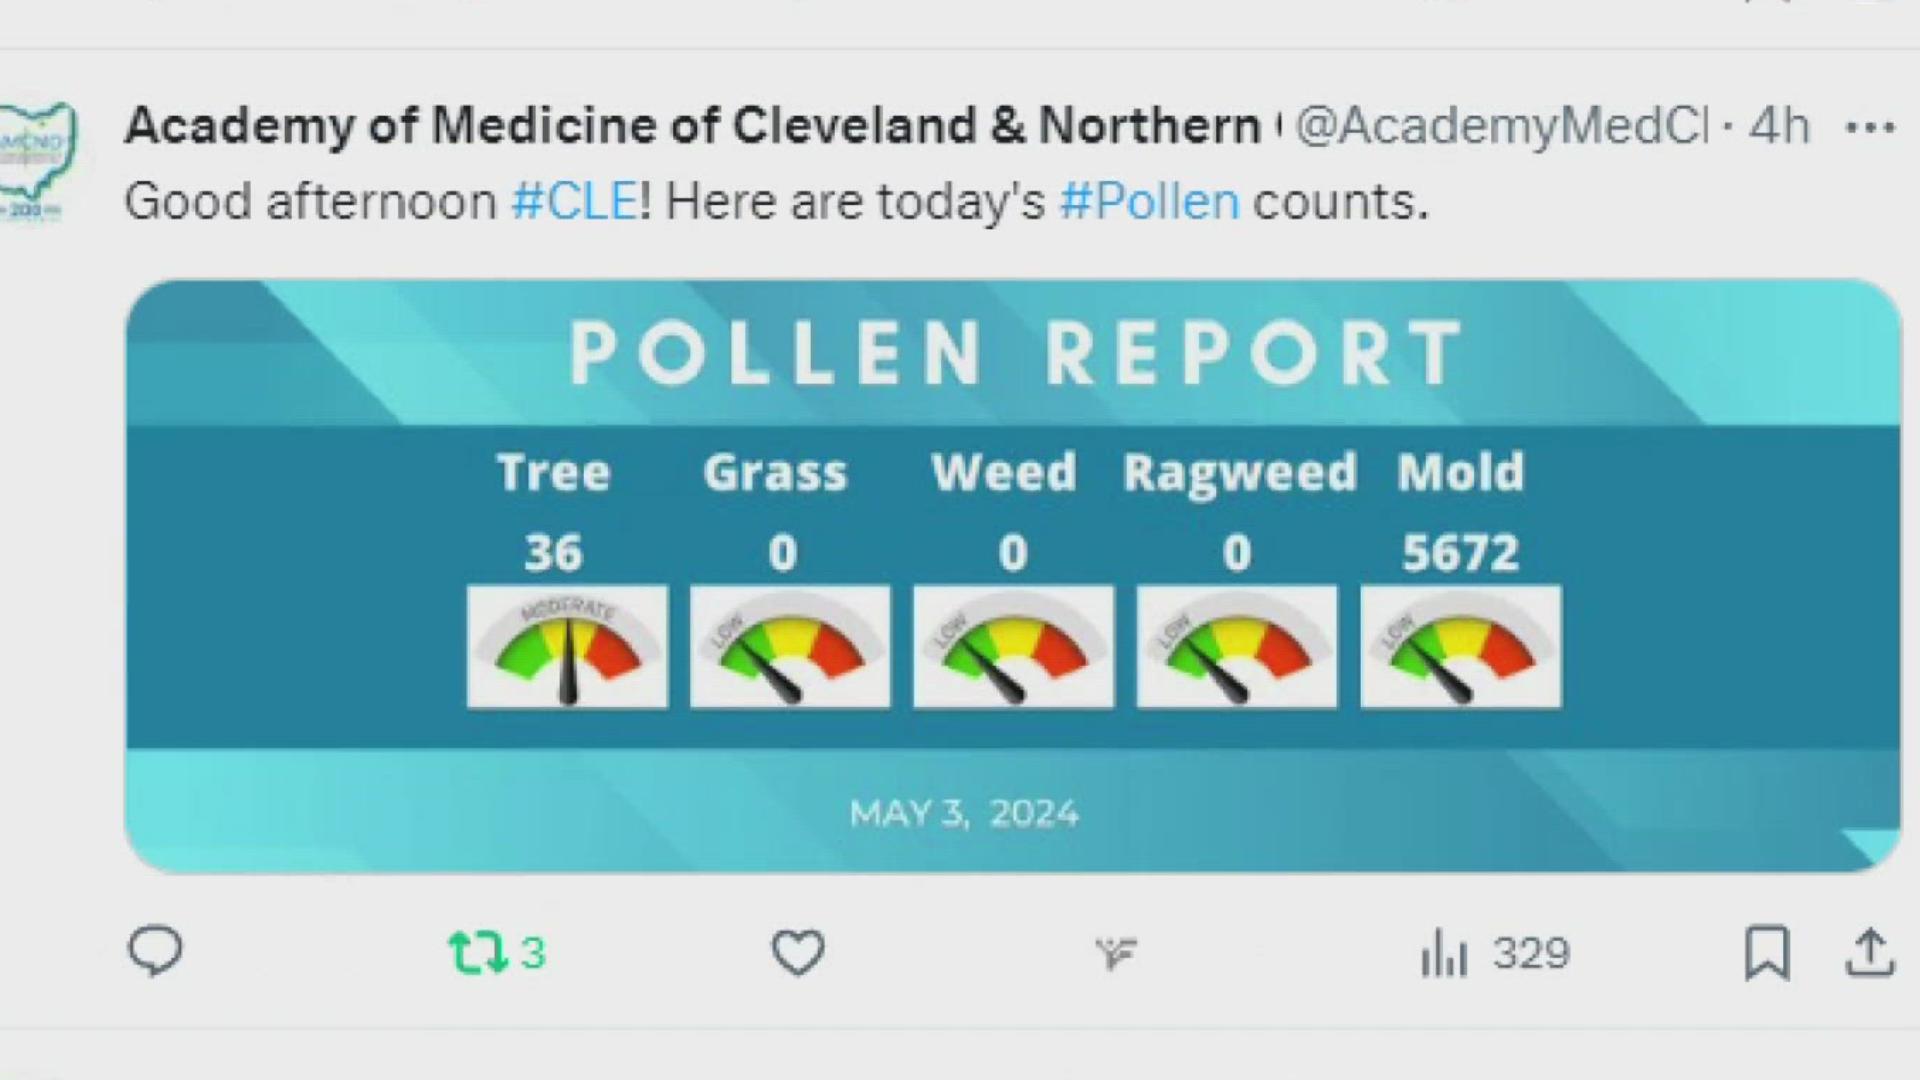 The Academy started tracking pollen levels in 1940.